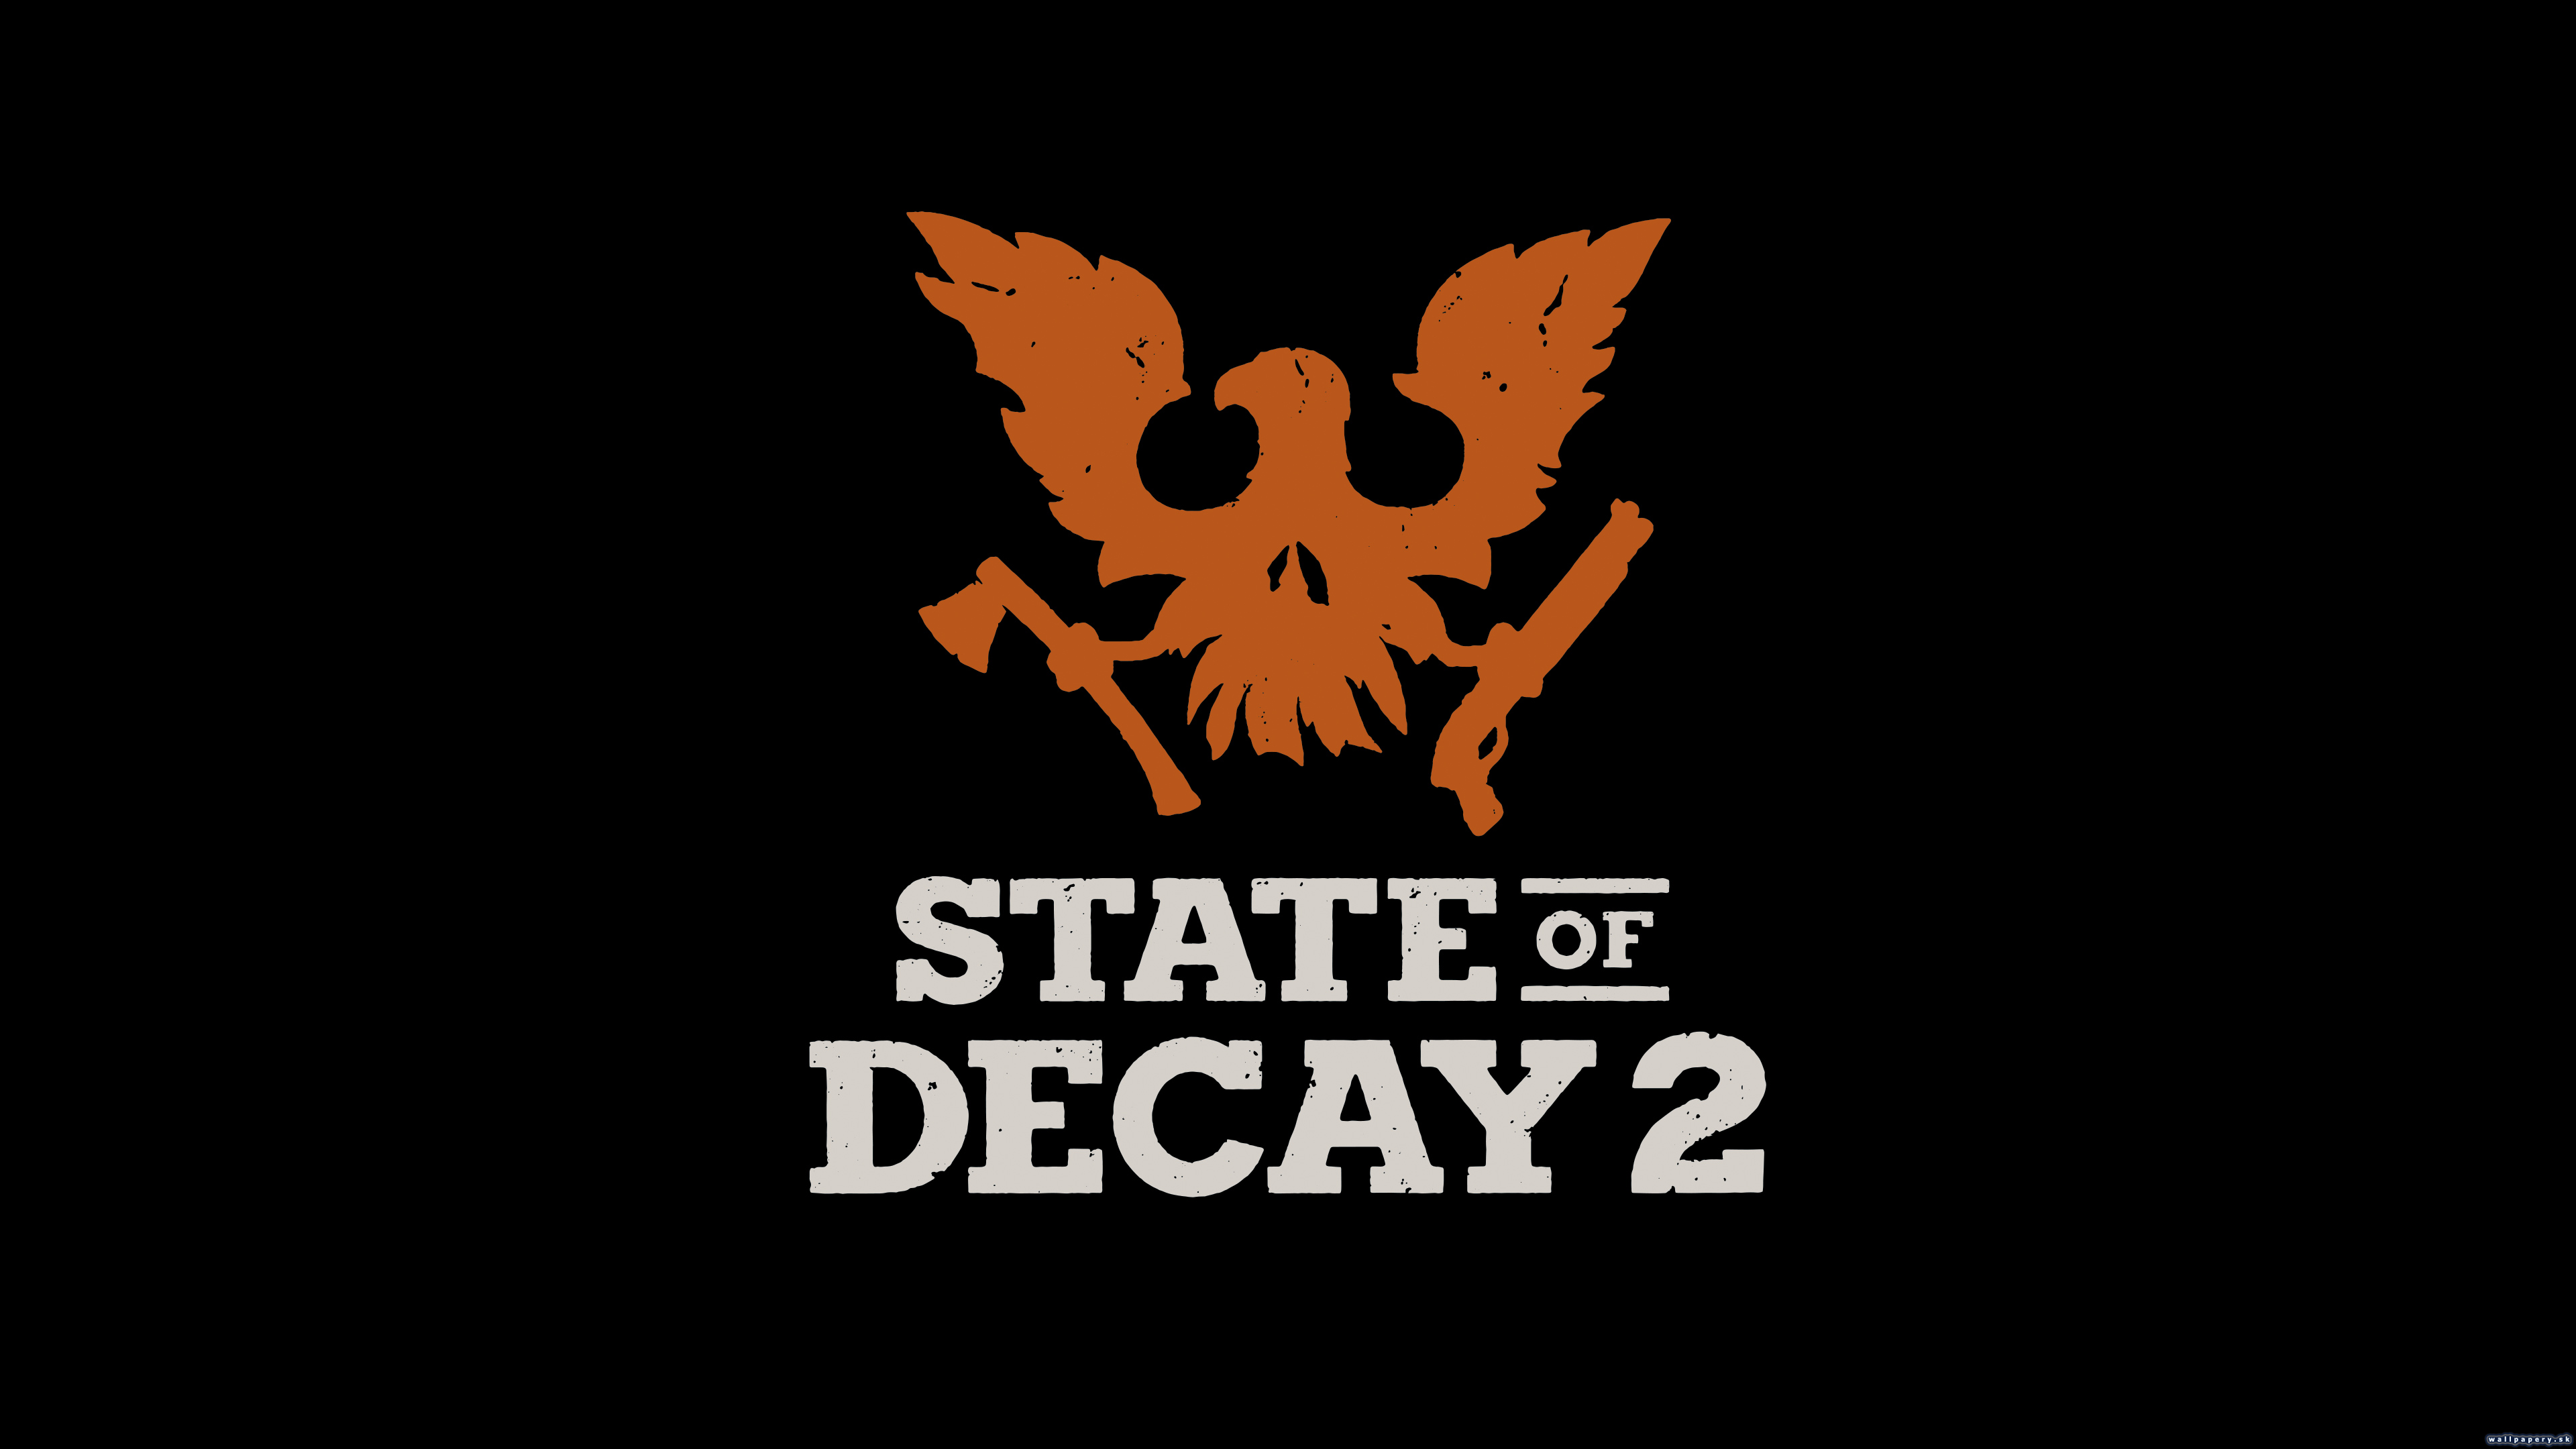 State of Decay 2 - wallpaper 2